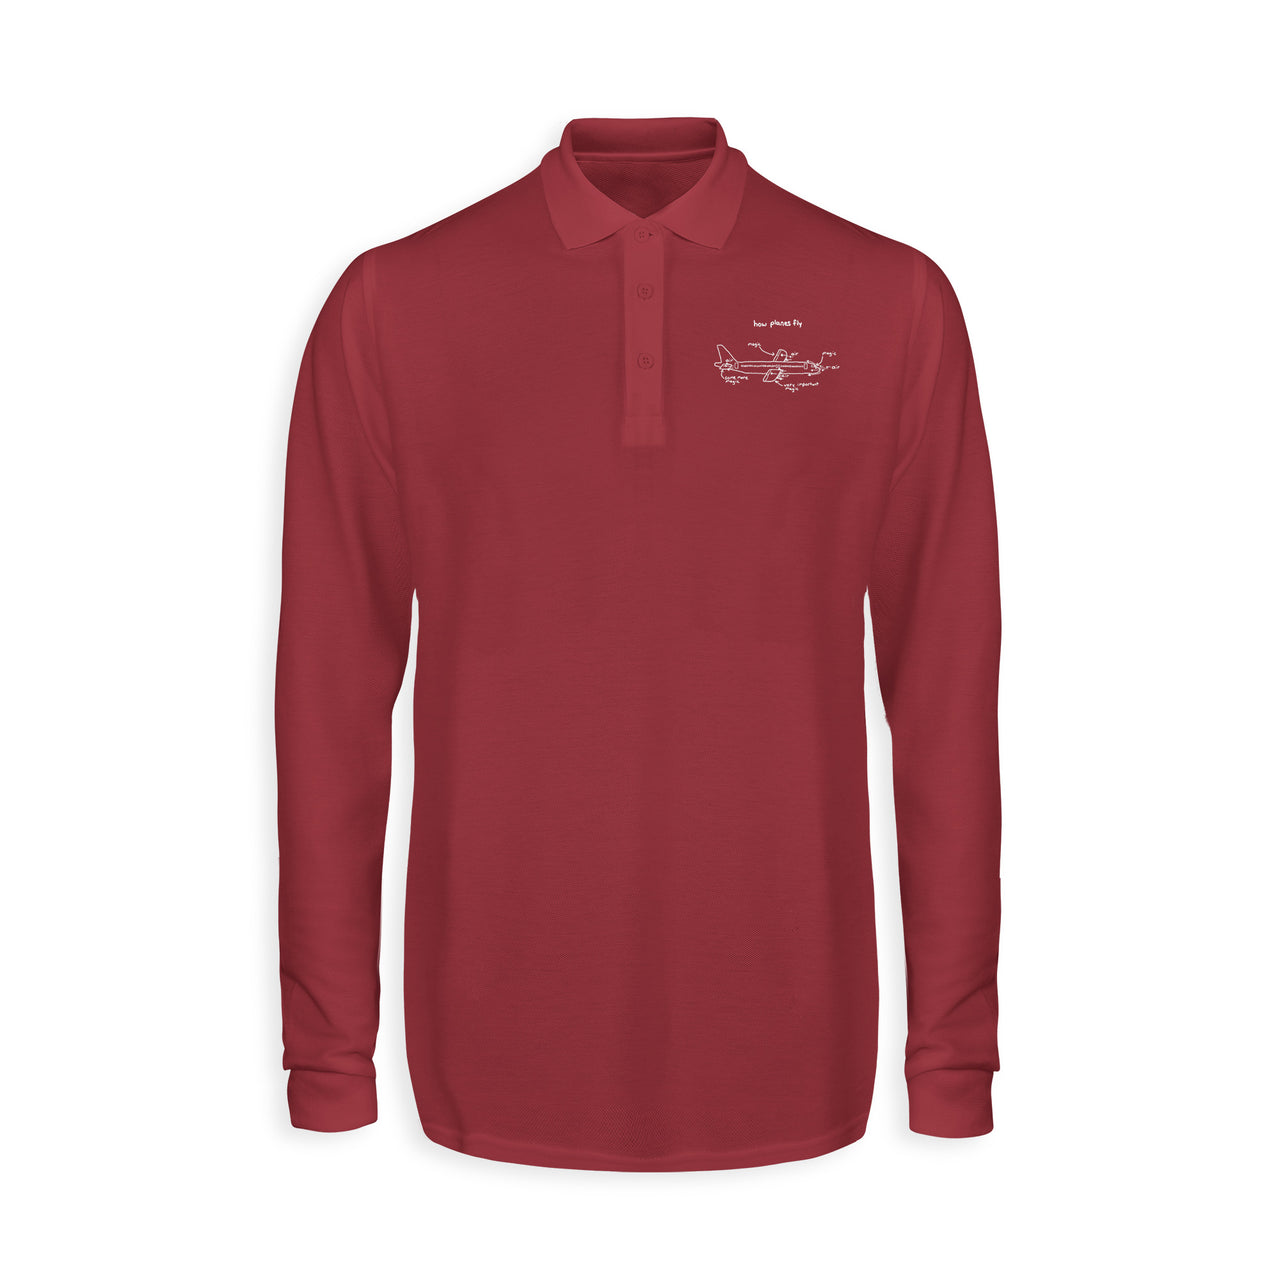 How Planes Fly Designed Long Sleeve Polo T-Shirts